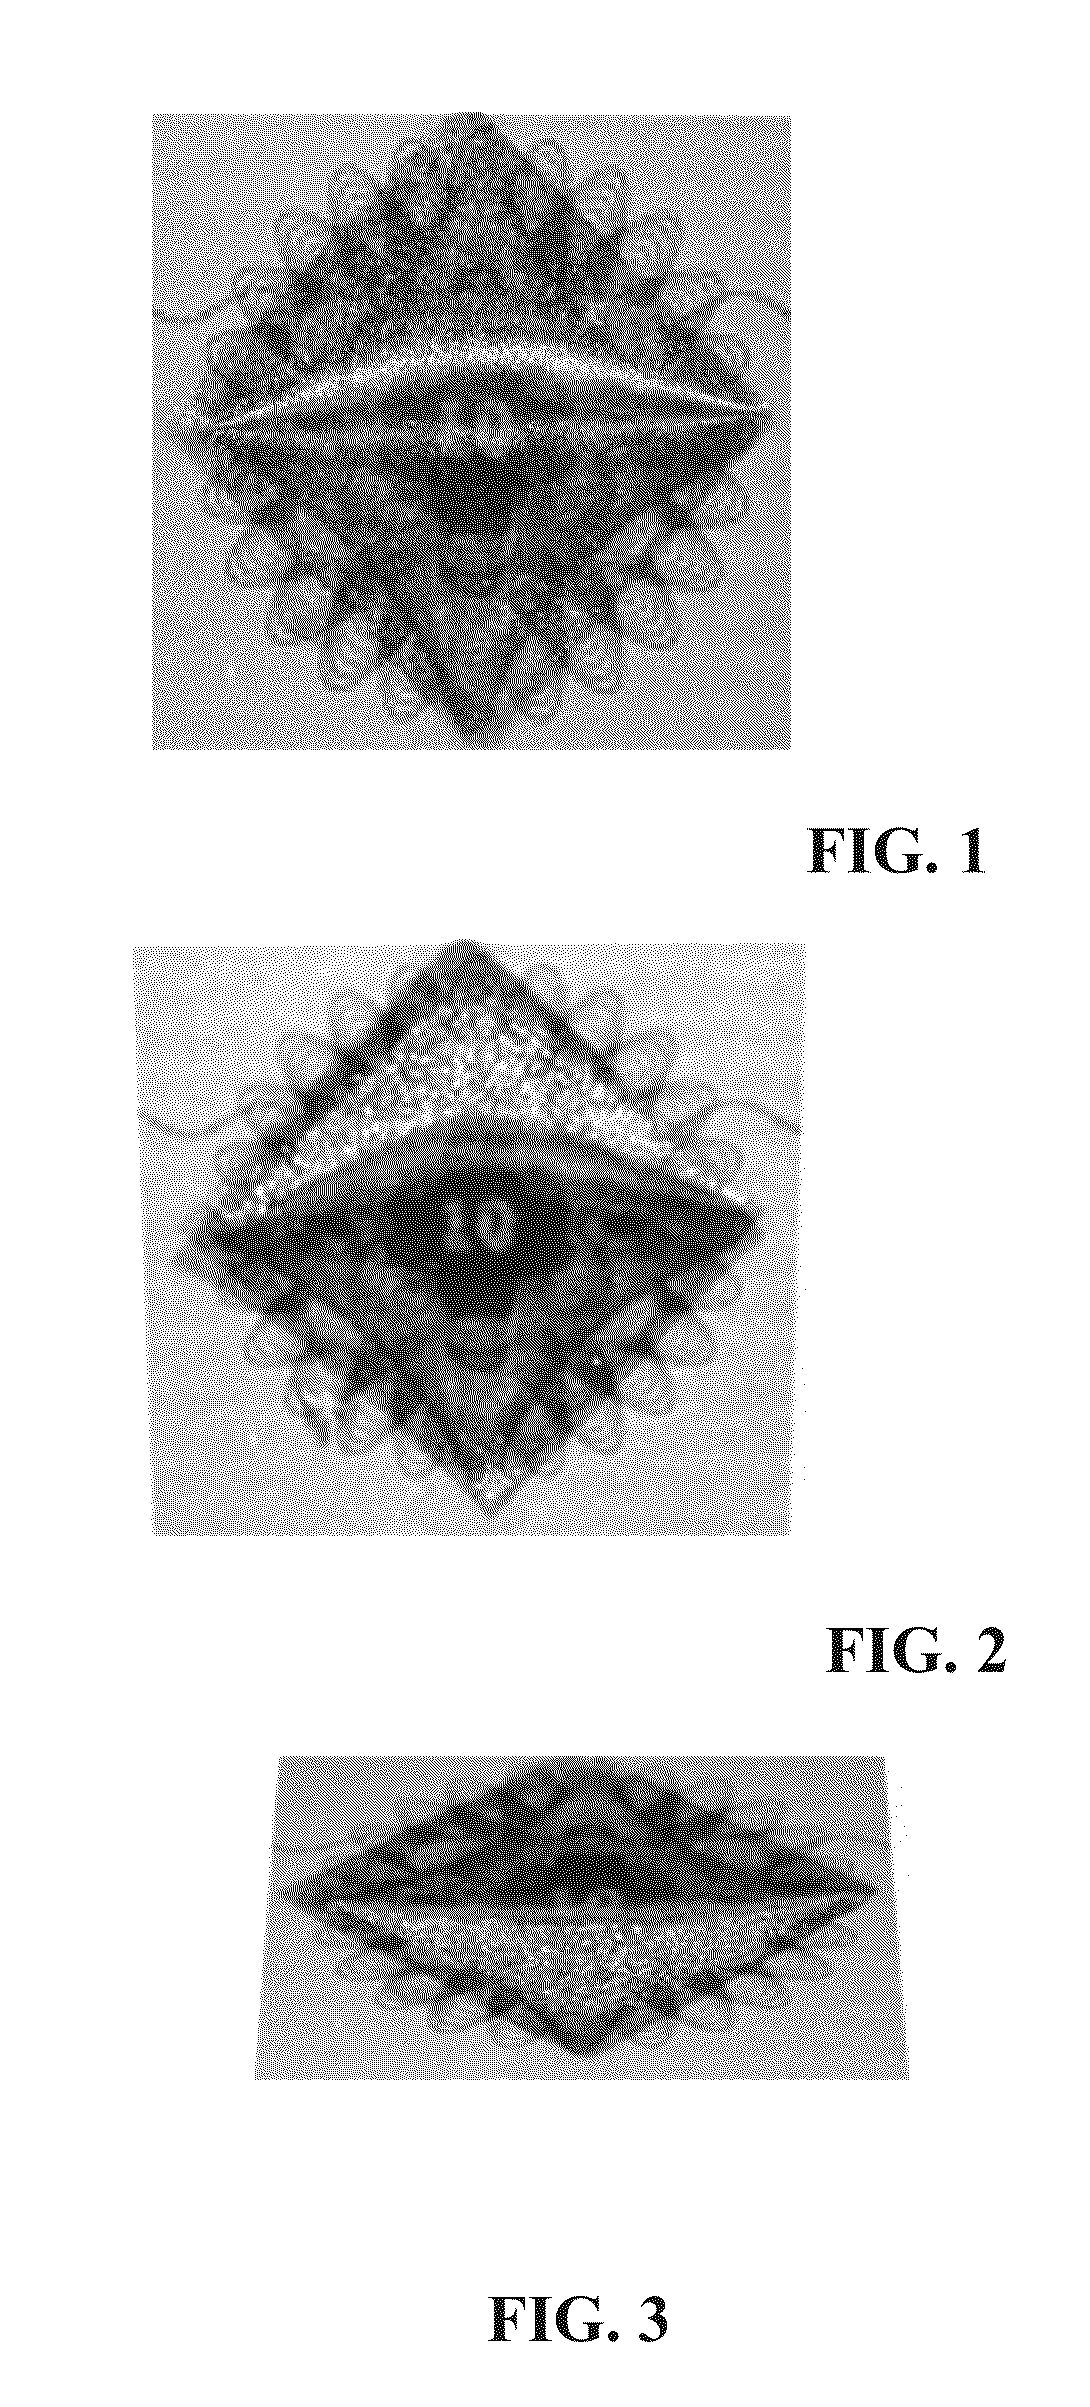 Article with curved patterns formed of aligned pigment flakes